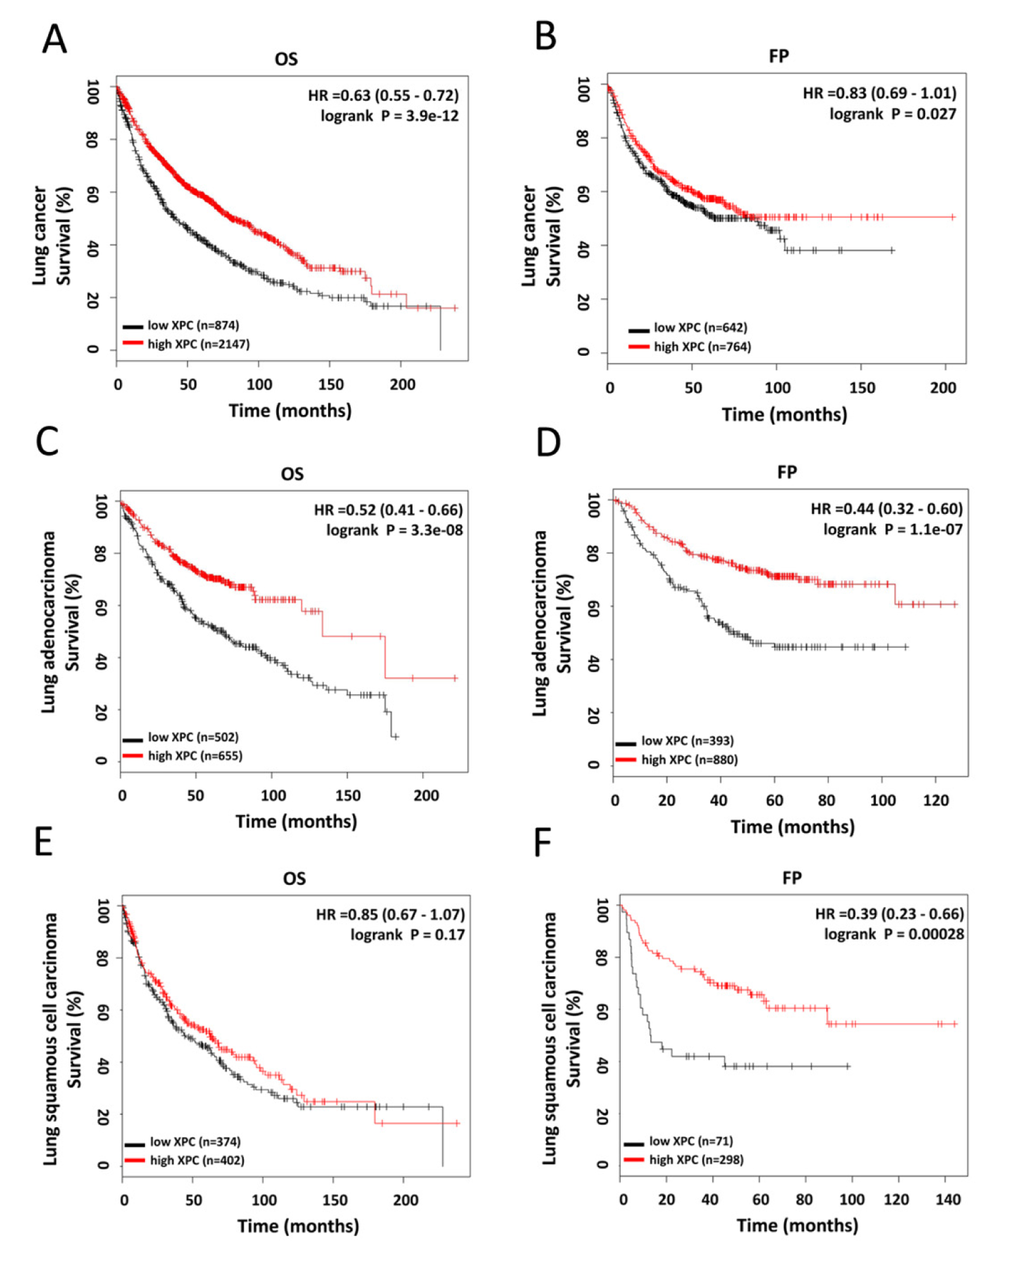 Prognostic significance of XPC in lung cancer. (A-B) The effect of XPC mRNA expression level on the overall survival and progression free survival in lung cancer patients was analyzed and the Kaplan-Meier plots were generated by Kaplan-Meier Plotter (http://www.kmplot.com). (C-D) The effect of XPC mRNA expression level on the overall survival and progression free survival in lung adenocarcinoma patients was analyzed and the Kaplan-Meier plots were generated by Kaplan-Meier Plotter (http://www.kmplot.com).